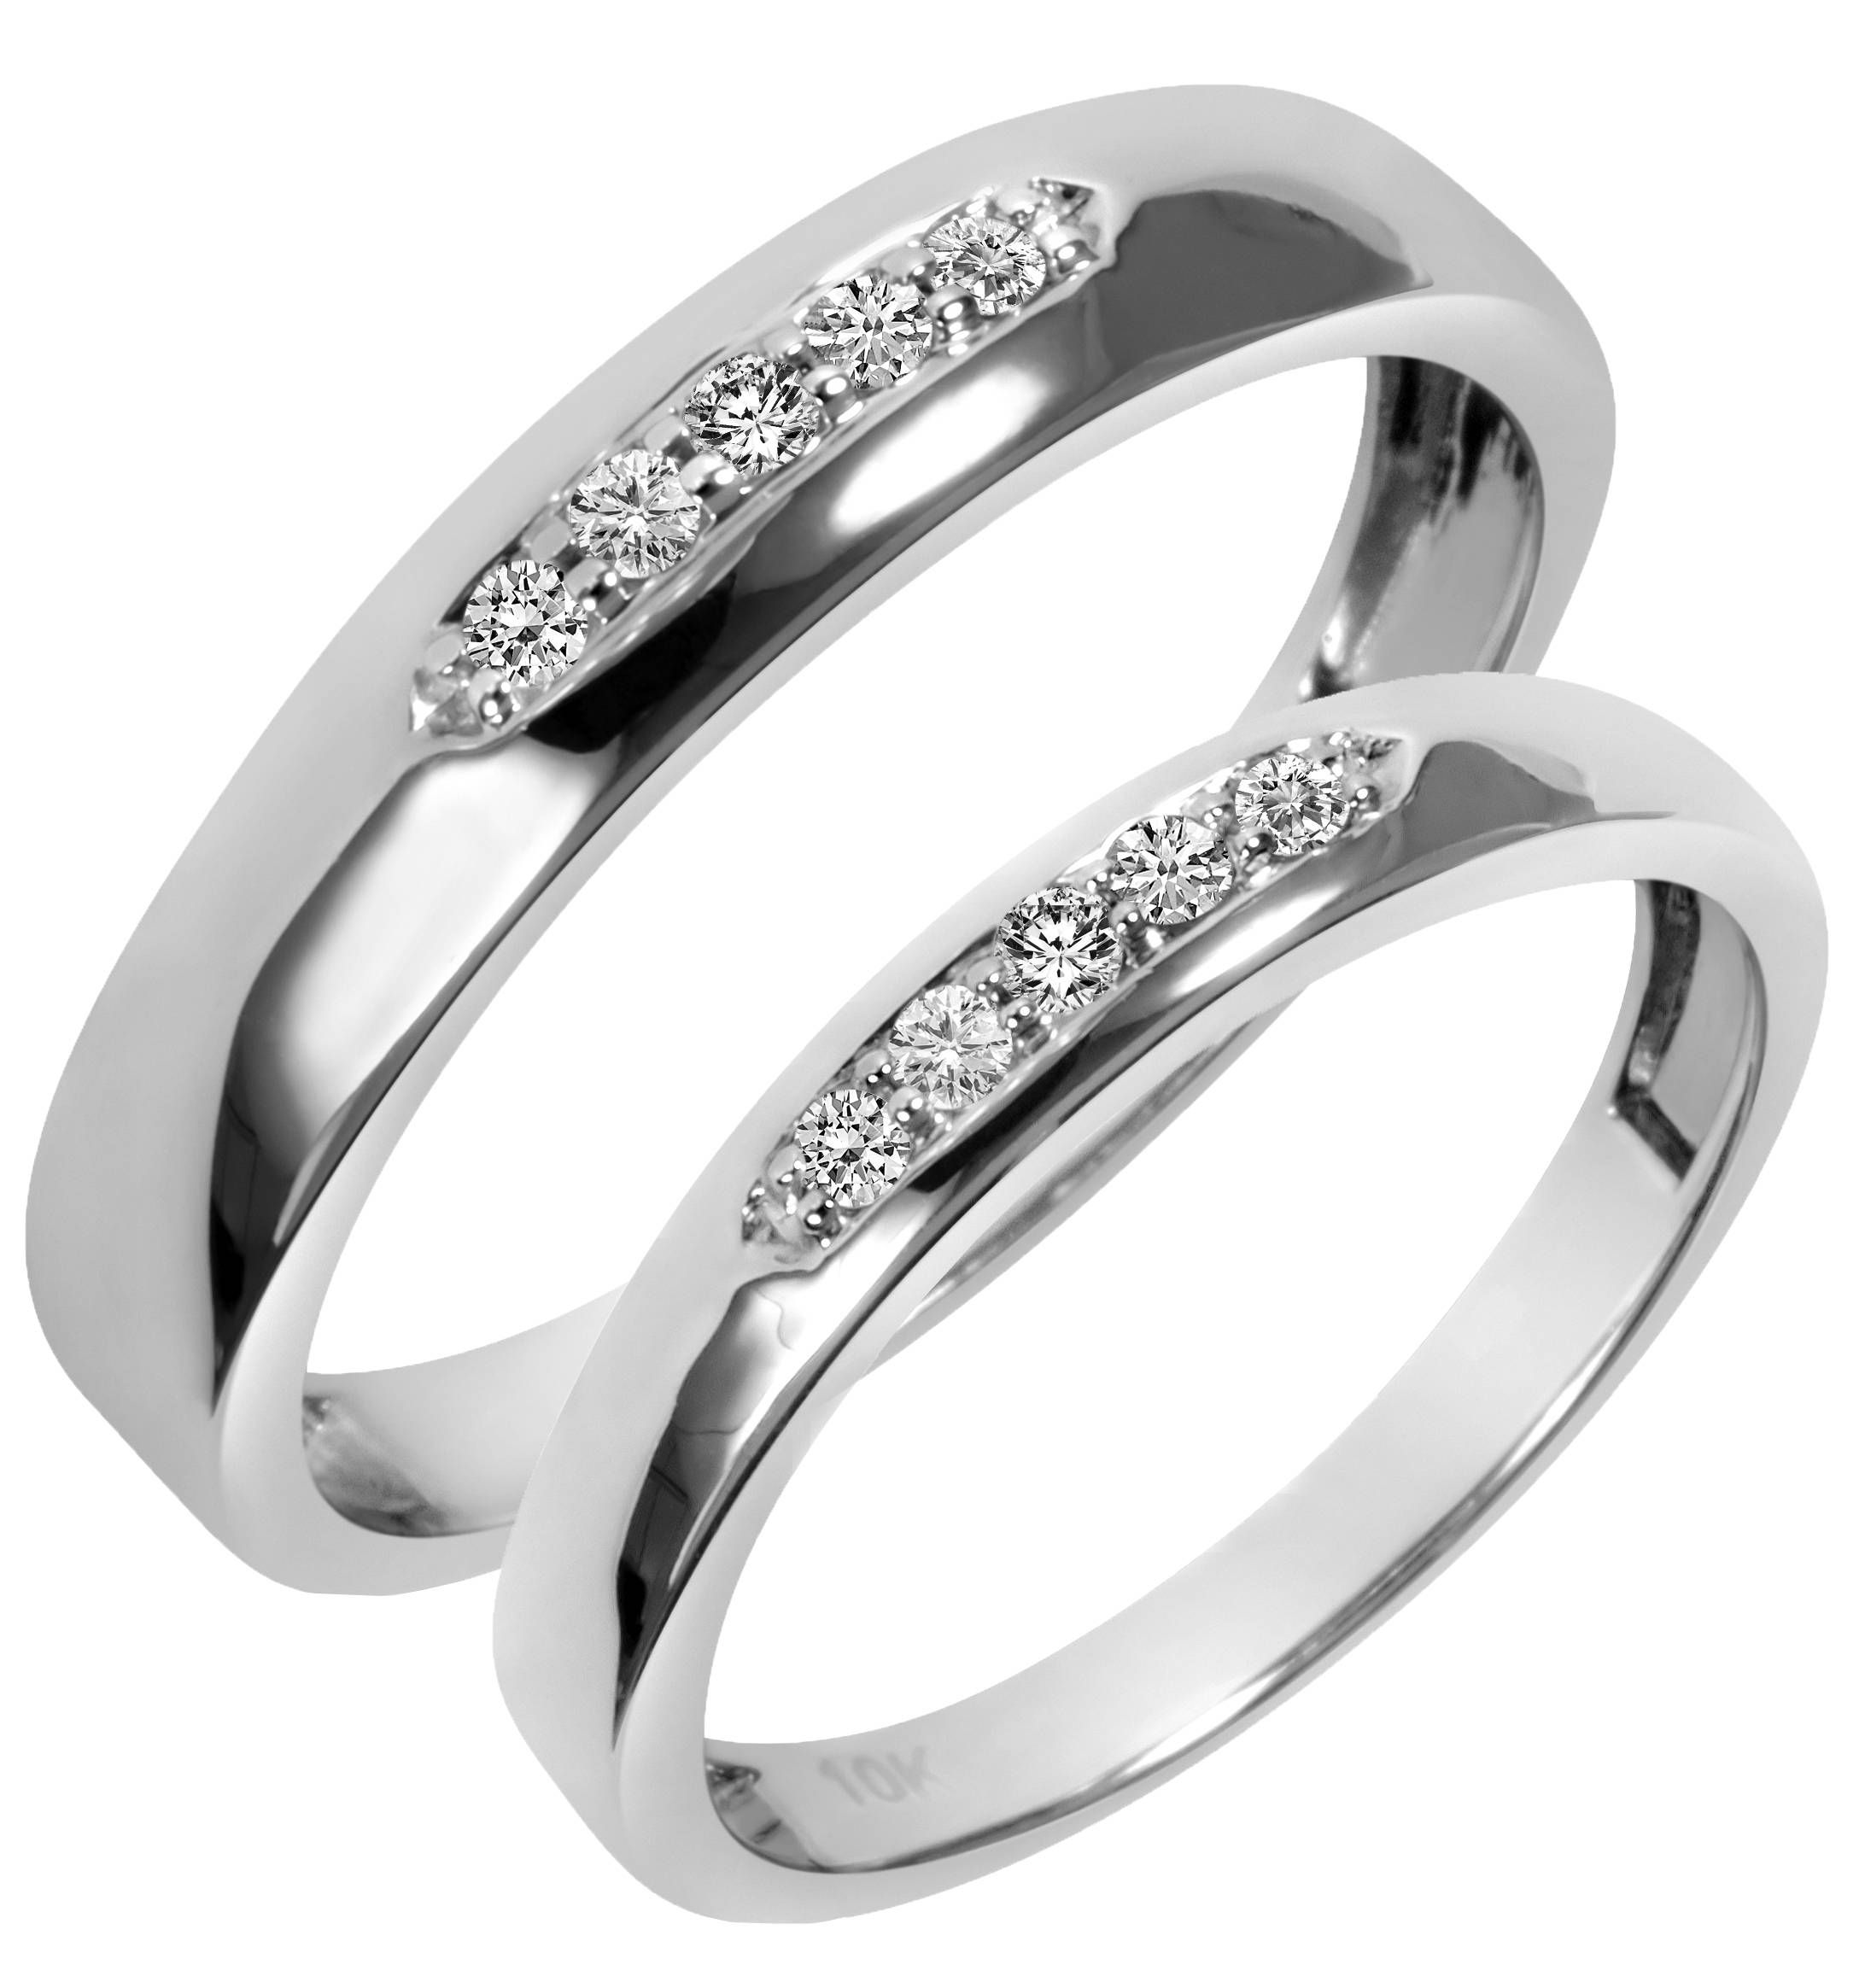 Featured Photo of Cheap Wedding Bands Sets His And Hers